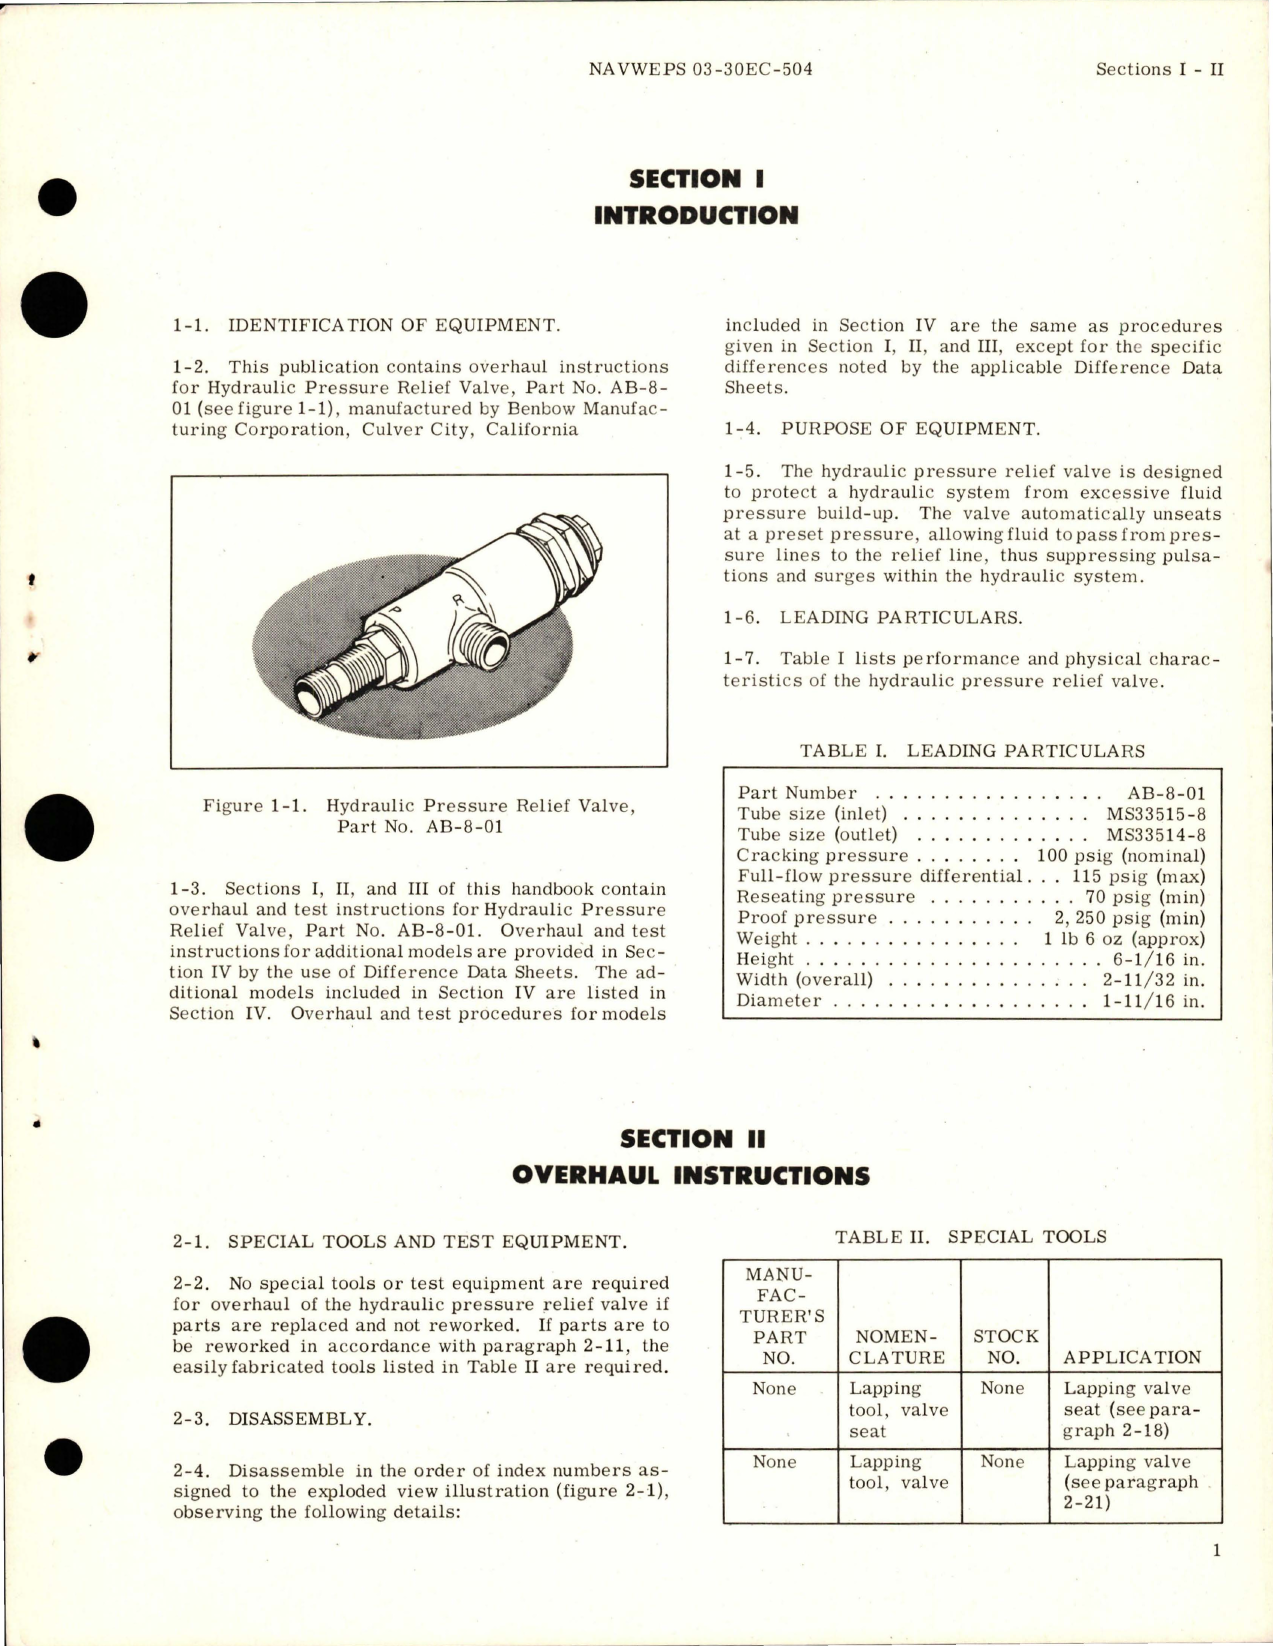 Sample page 5 from AirCorps Library document: Overhaul Instructions for Hydraulic Pressure Relief Valves